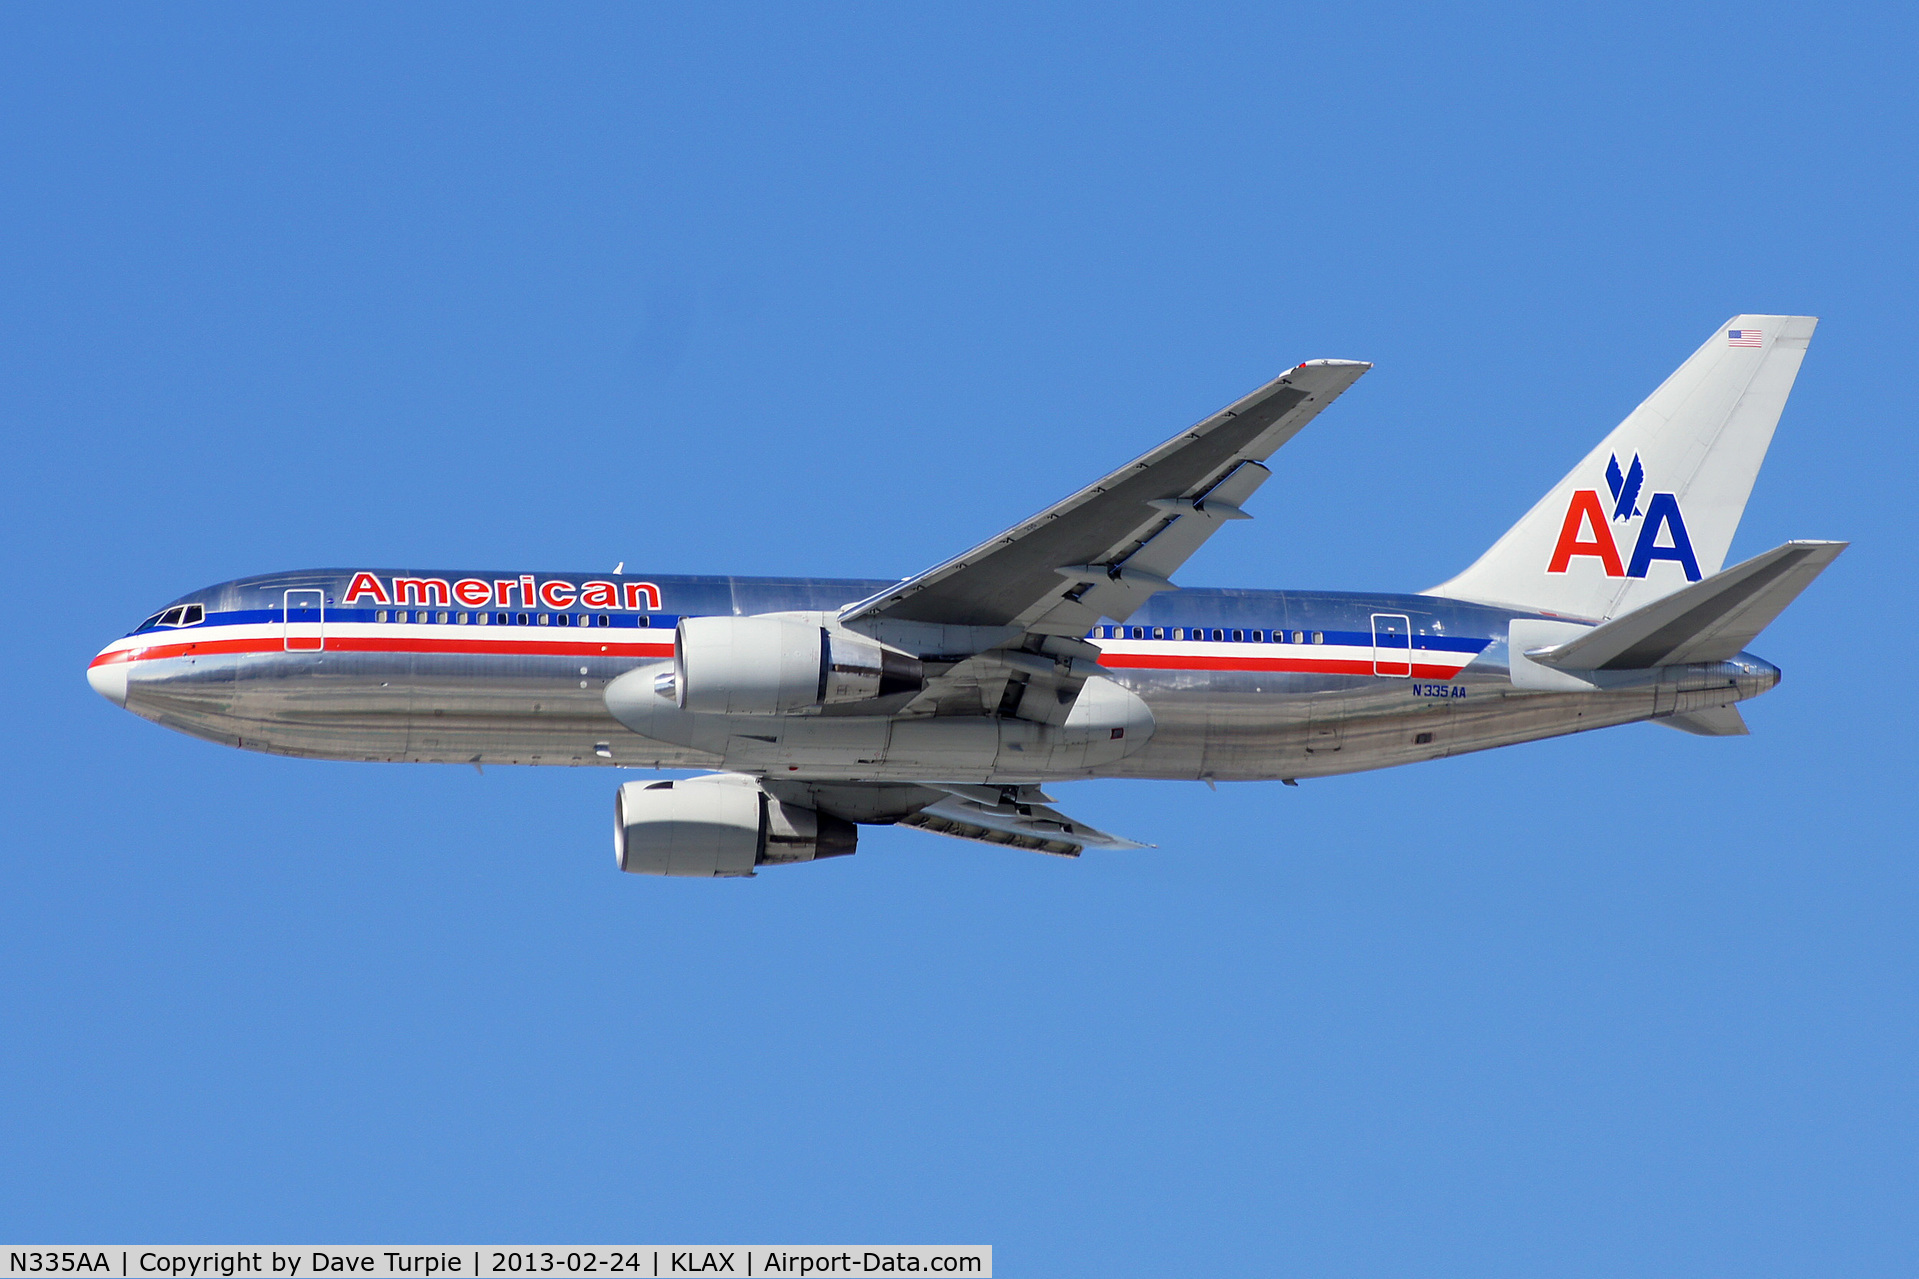 N335AA, 1987 Boeing 767-223 C/N 22333, Withdrawn from use in 2014.  Stored at KROW.